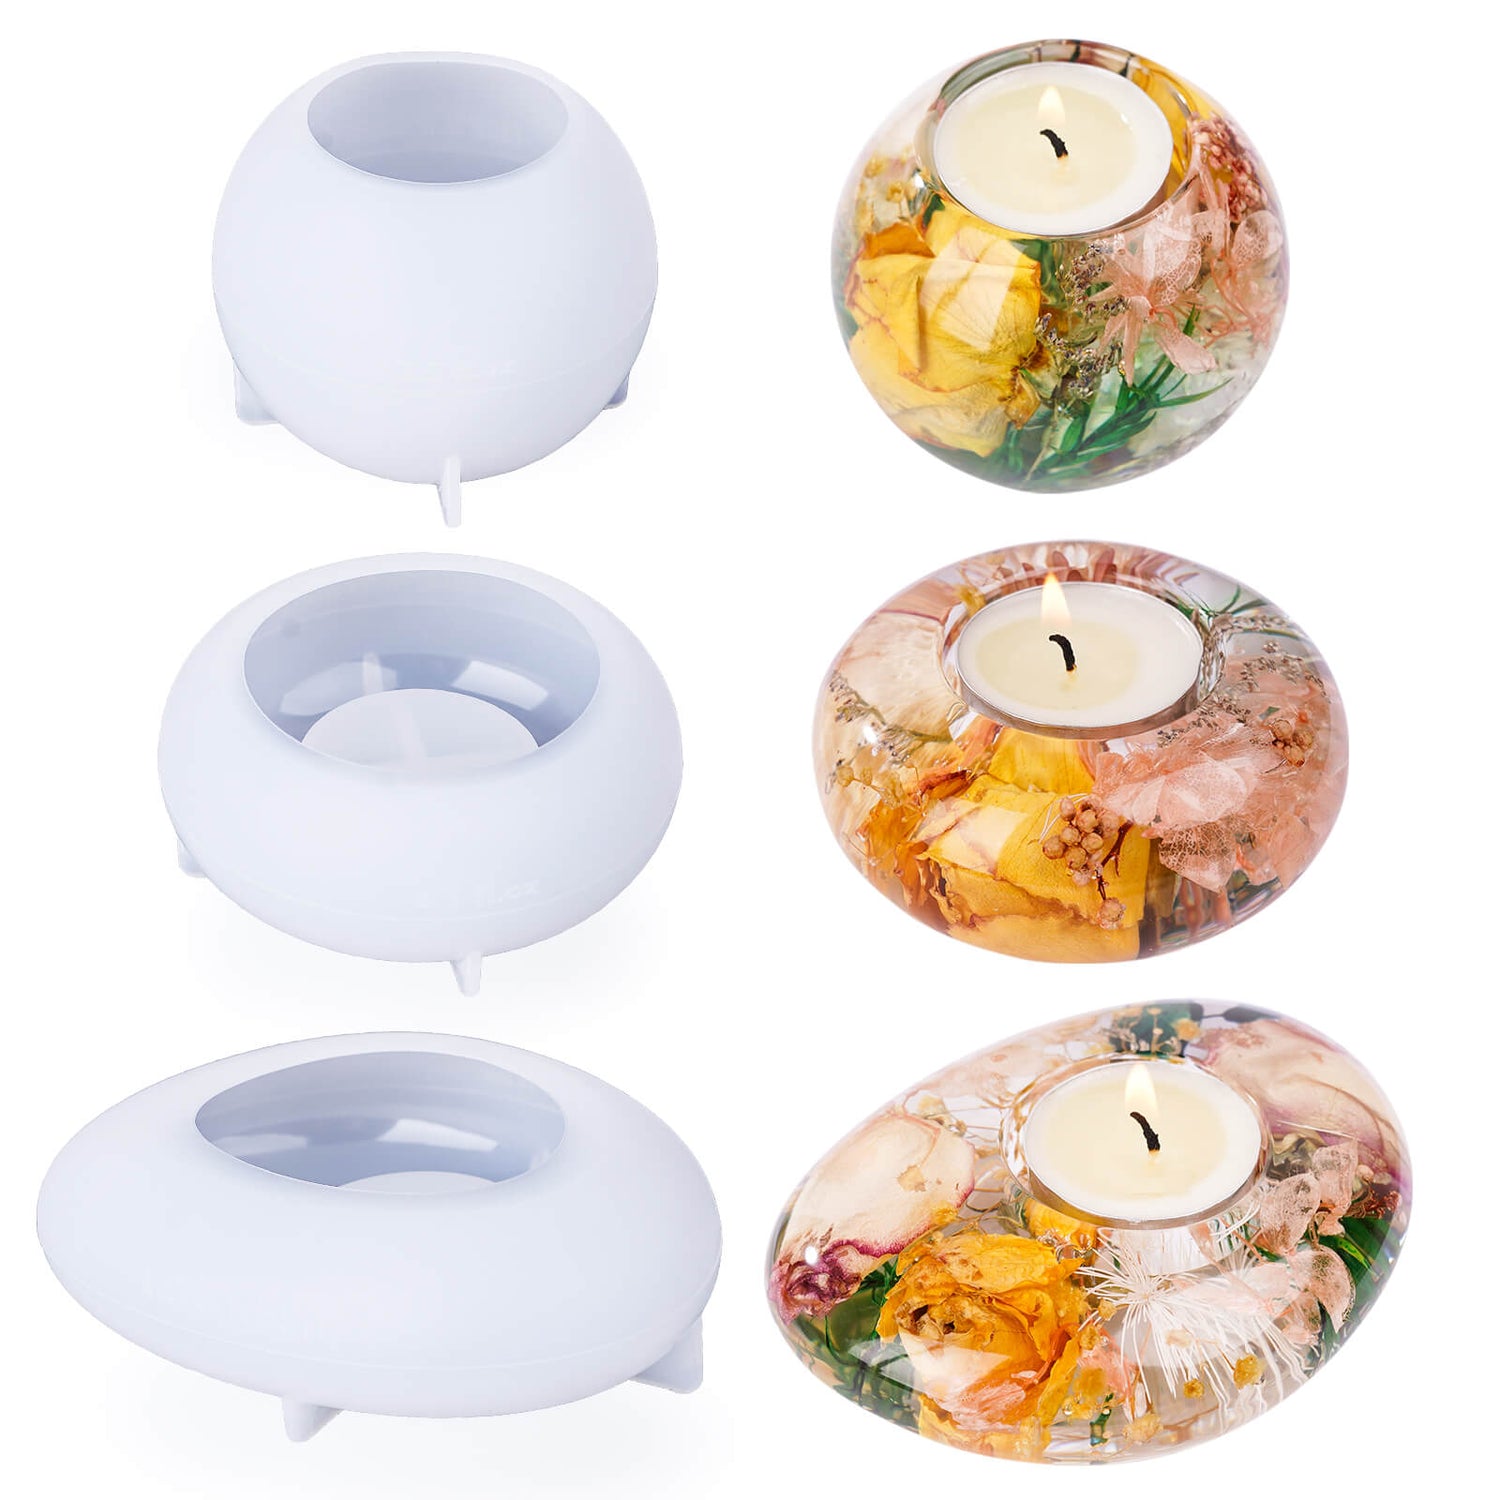 LET'S RESIN Tealight Candle Holder Resin Molds, Set of 3 Candle Holder Silicone  Molds for Epoxy Resin Including Round, Oval, Pebble Shape, Resin Epoxy  Molds Silicone for DIY Home Décor, Wedding Gift –